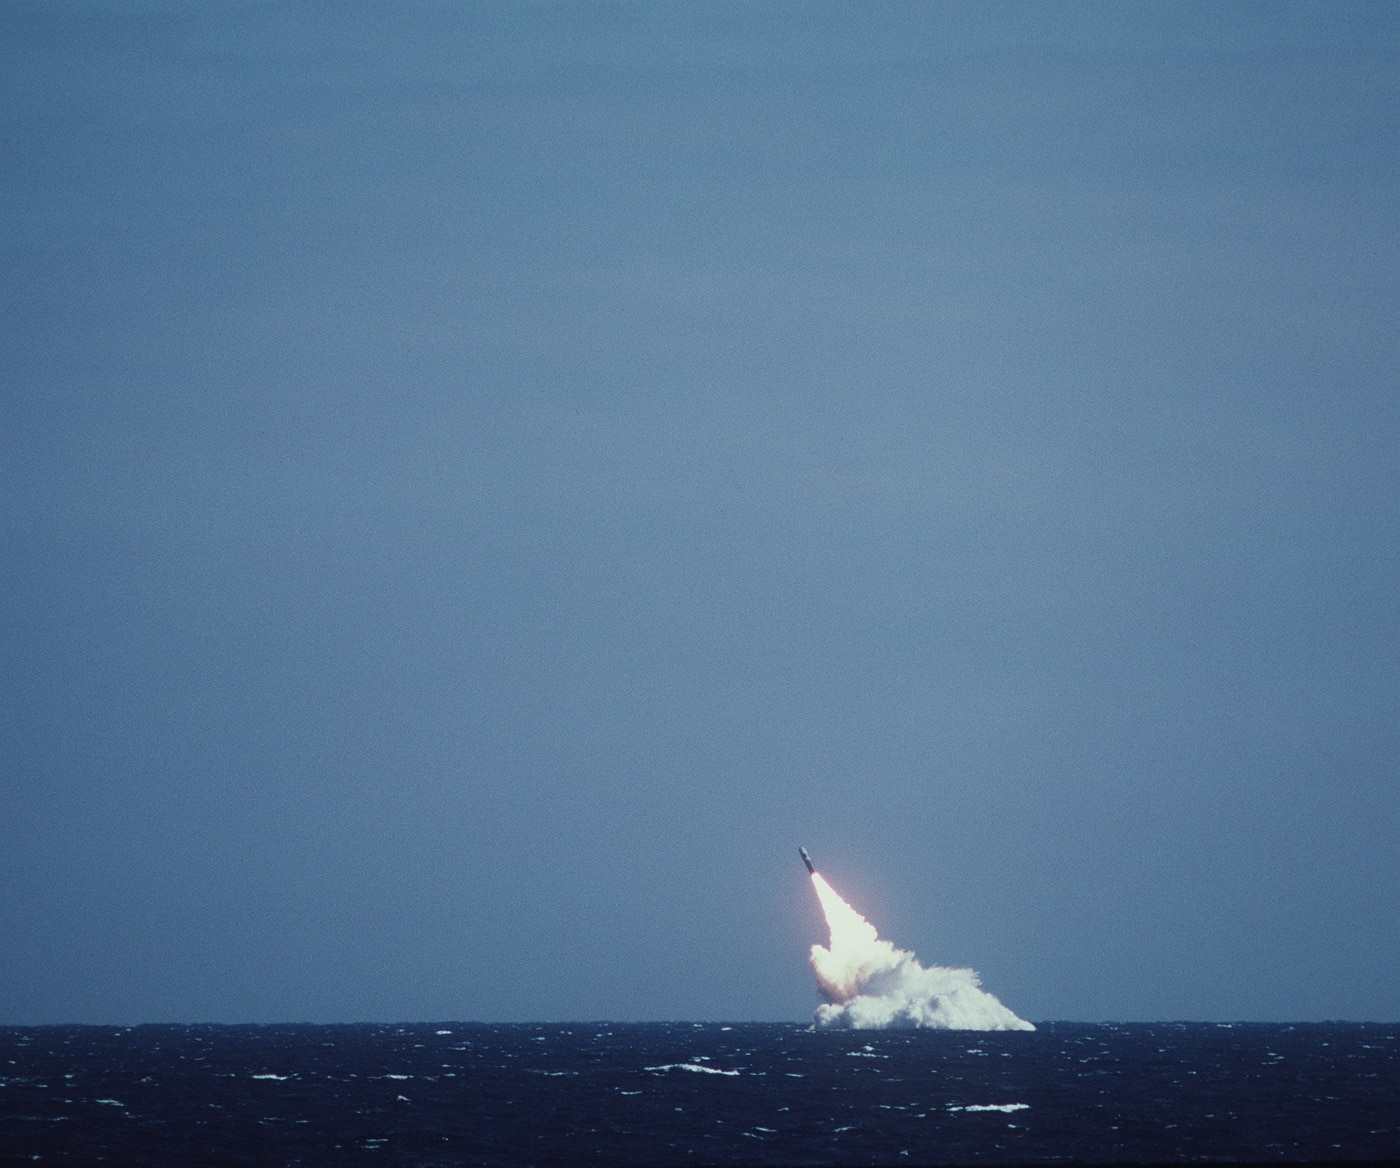 D-5 Trident II submarine launched nuclear missile launched from USS Tennessee near coast of Florida